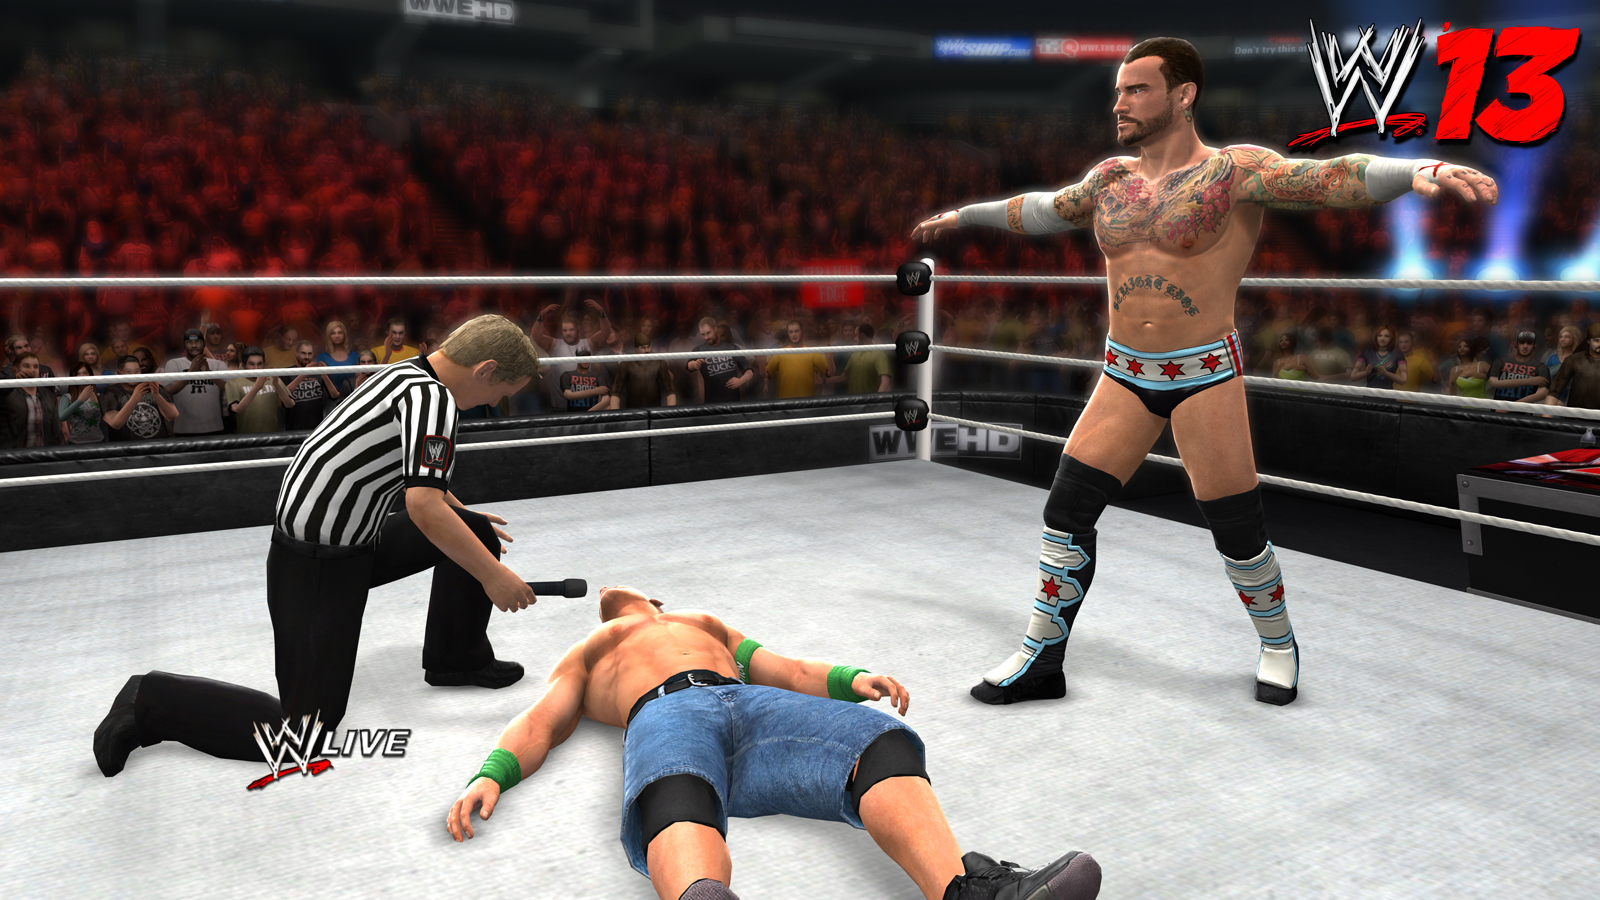 Wwe 2k13 download for pc torrent